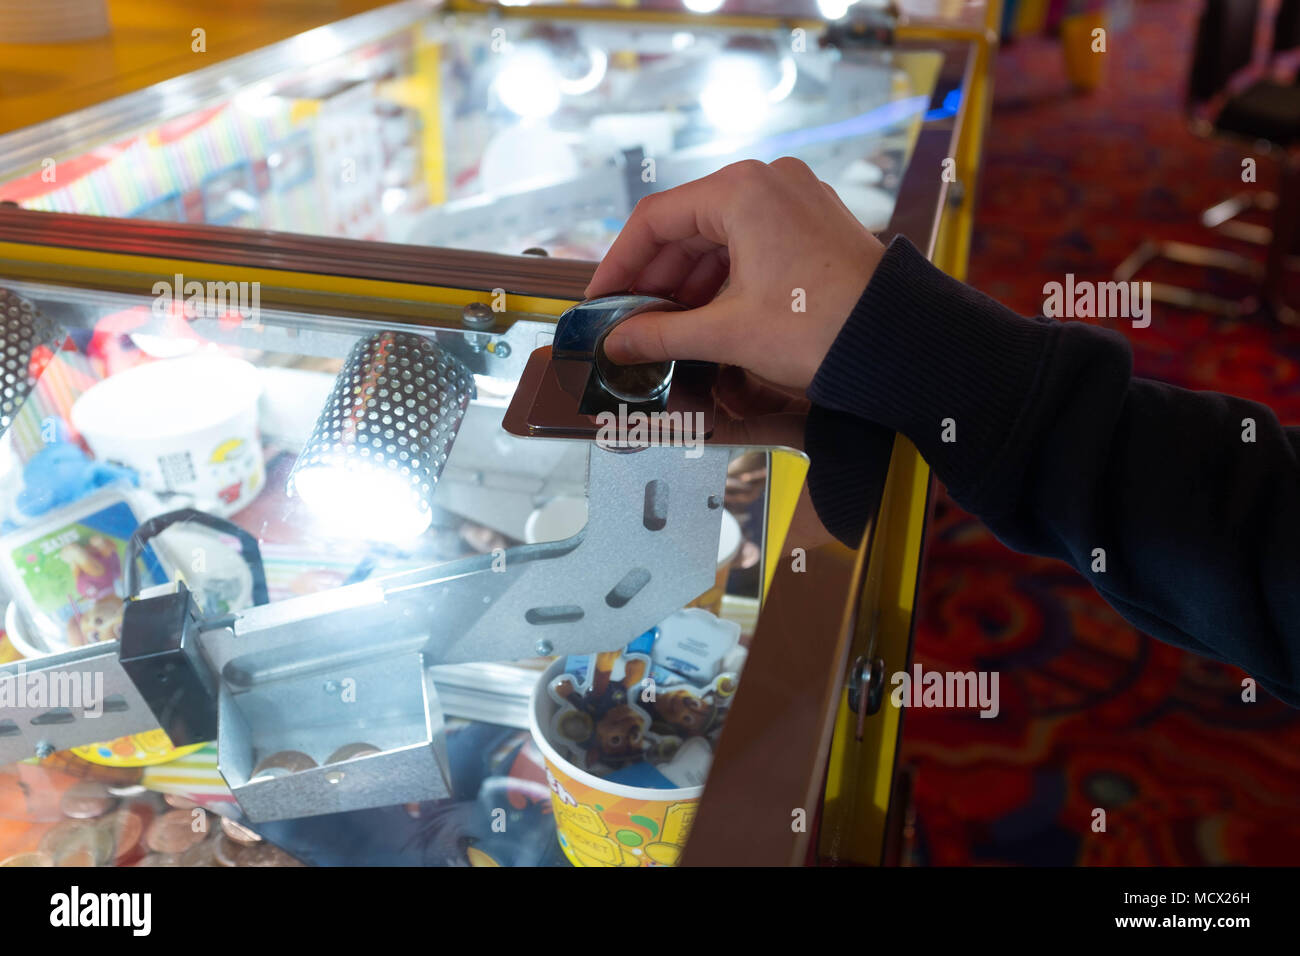 Playing slot machines at the amusement arcades in Skegness, UK Stock Photo